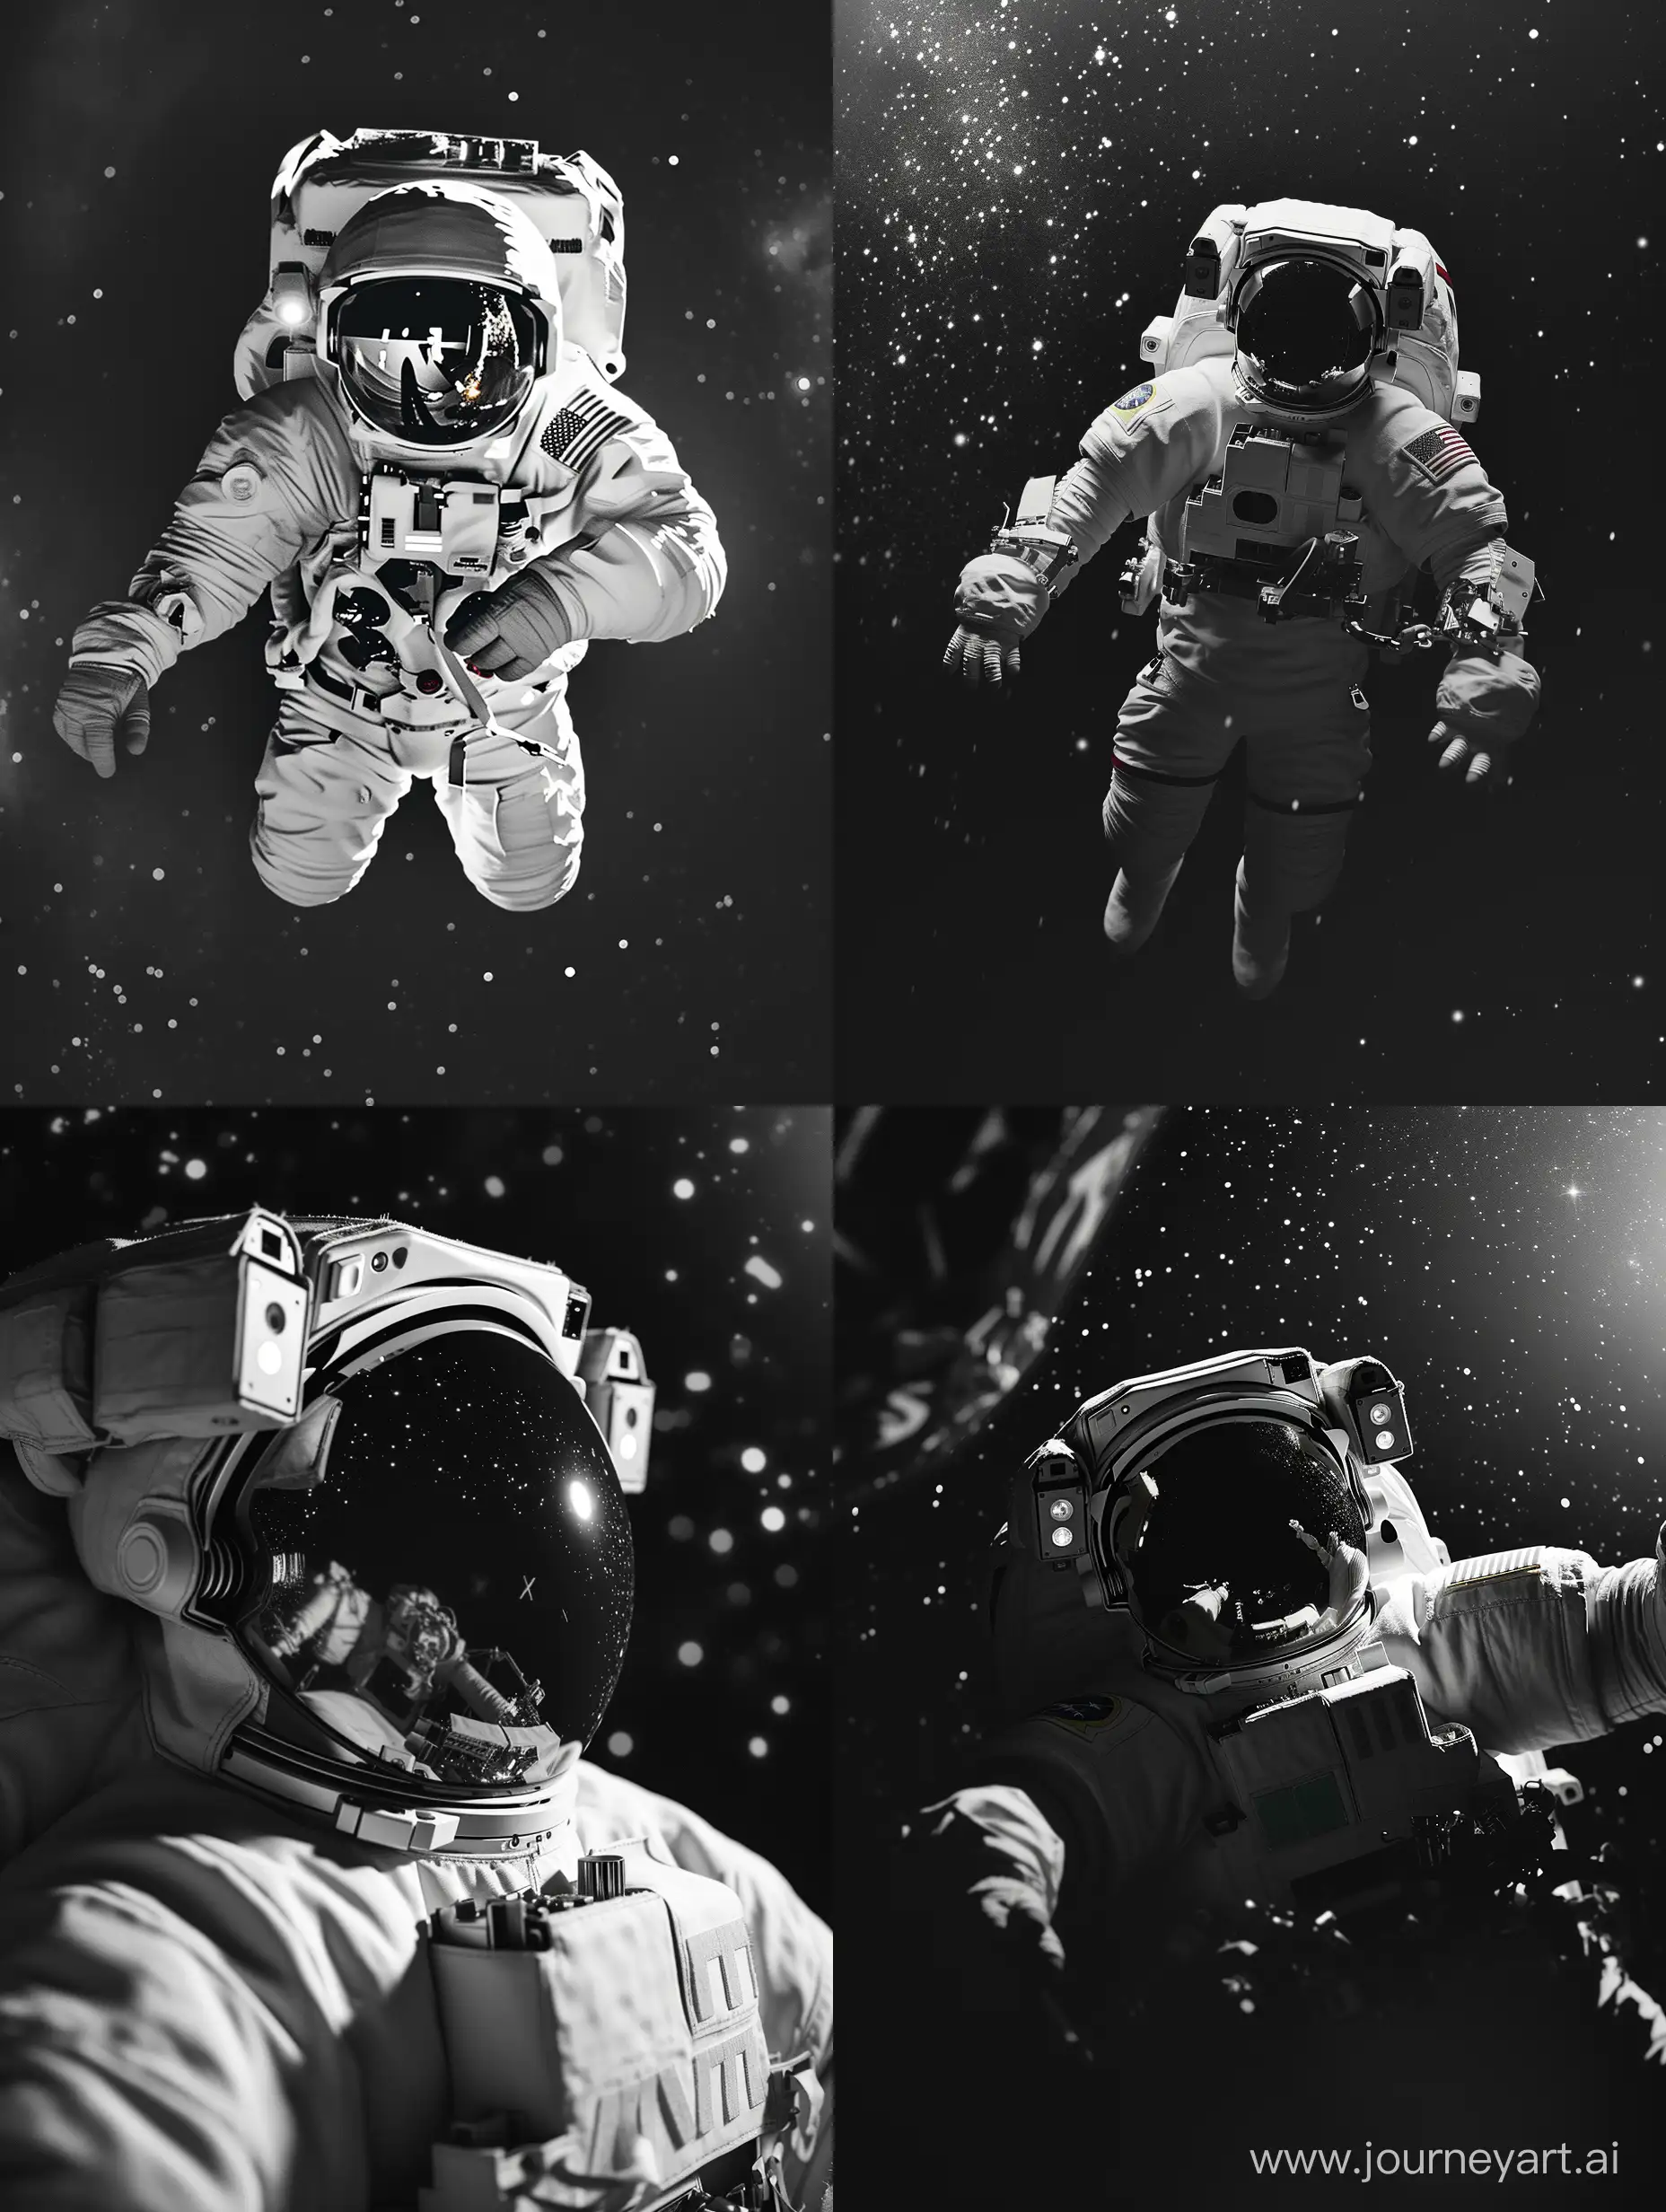 Solitary-Astronaut-Floating-in-Raw-Black-White-Space-Fujifilm-Shot